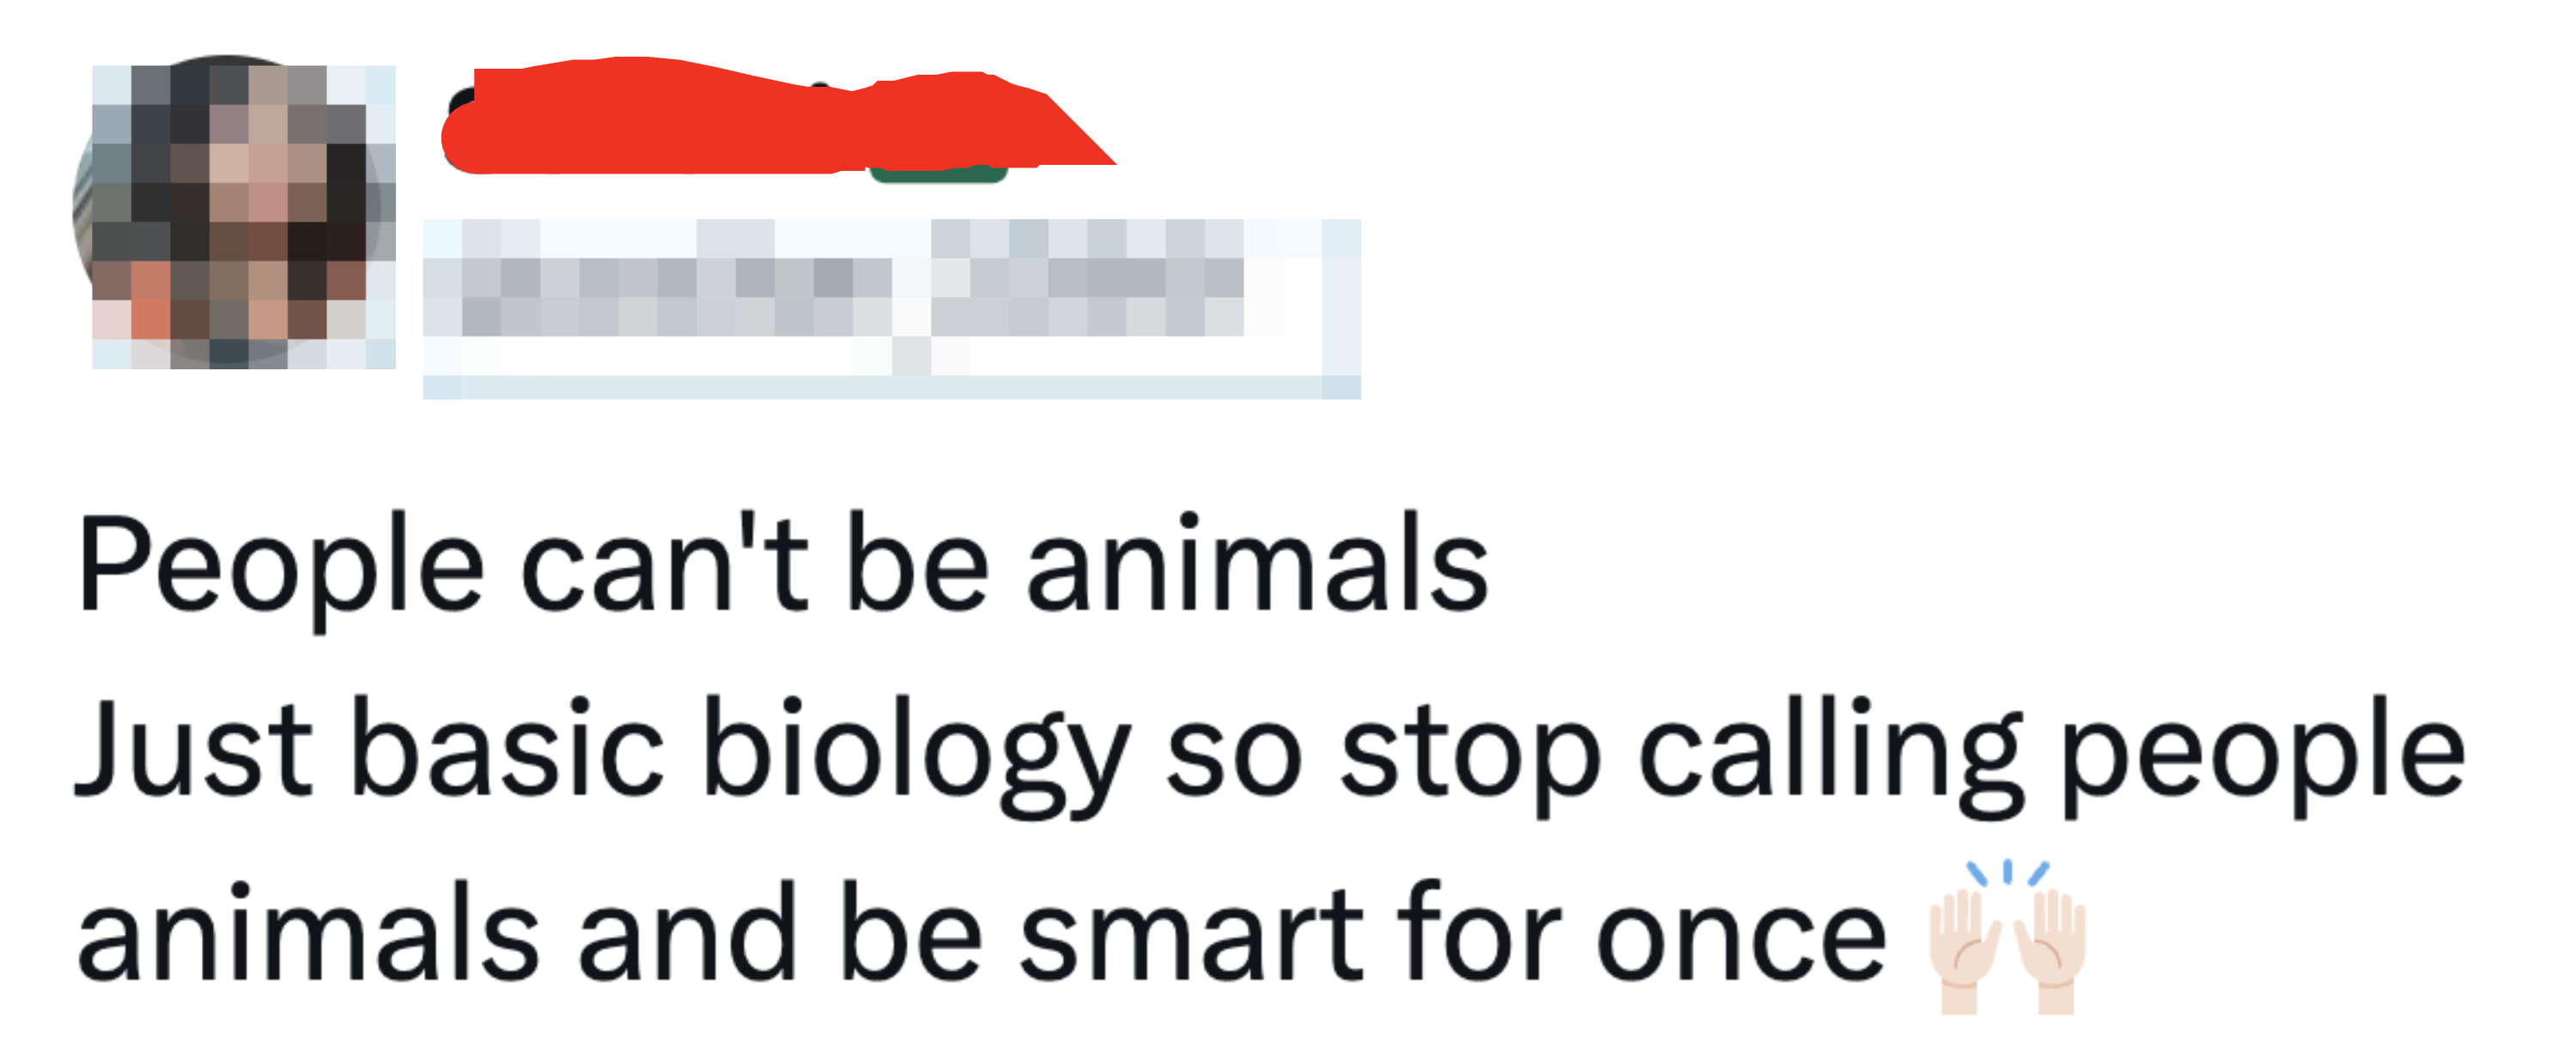 Twitter user disapproves of referring to people as animals, urging smart behavior